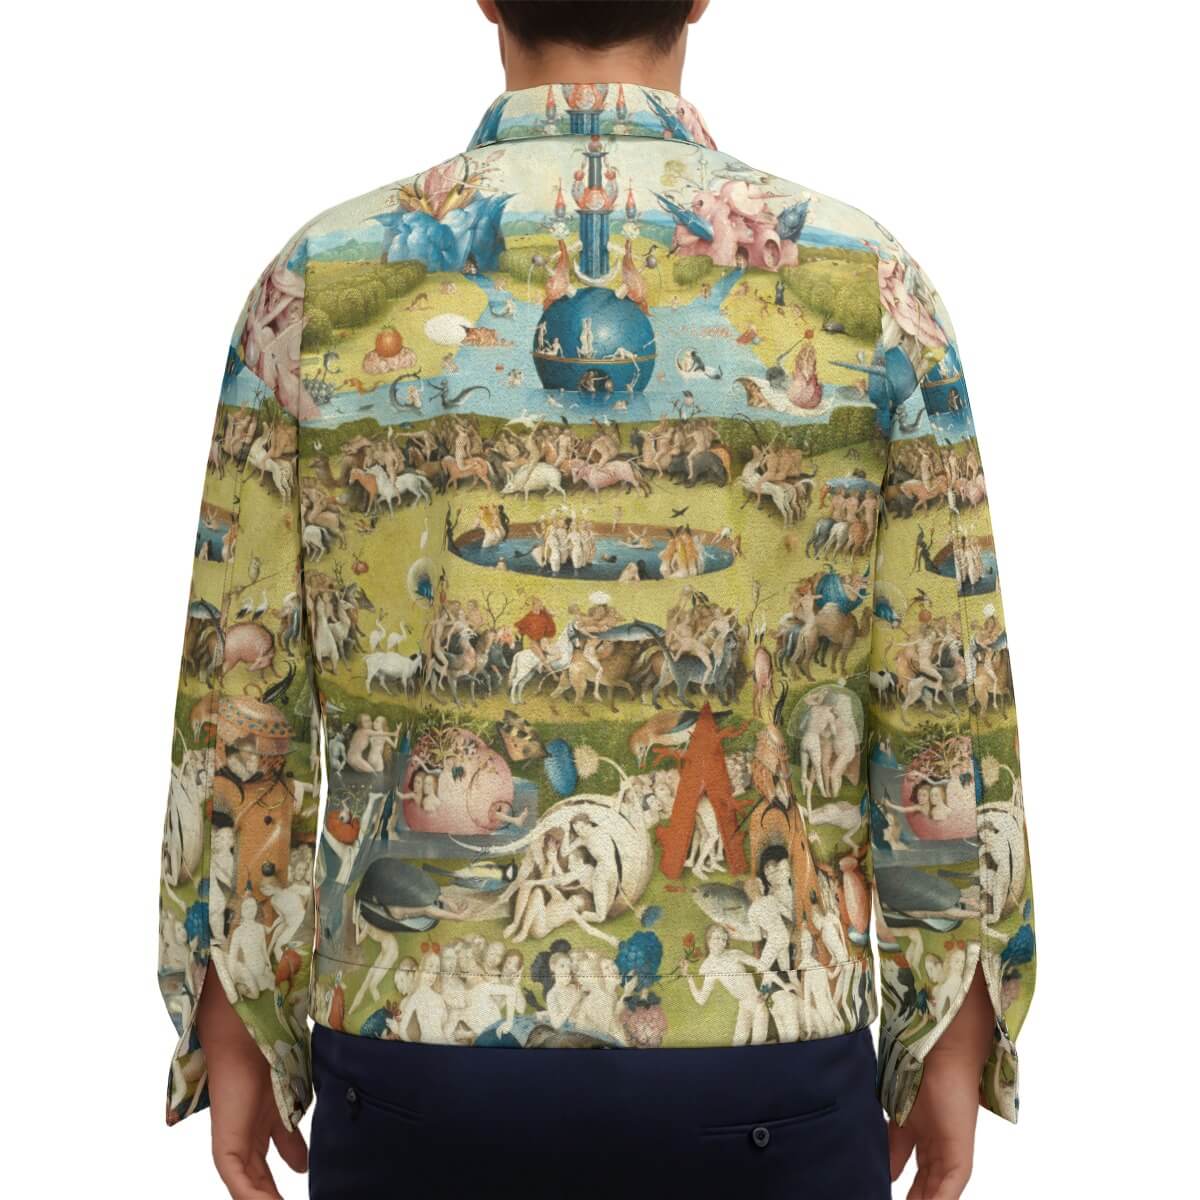 Wearable Art with Bosch's Influence